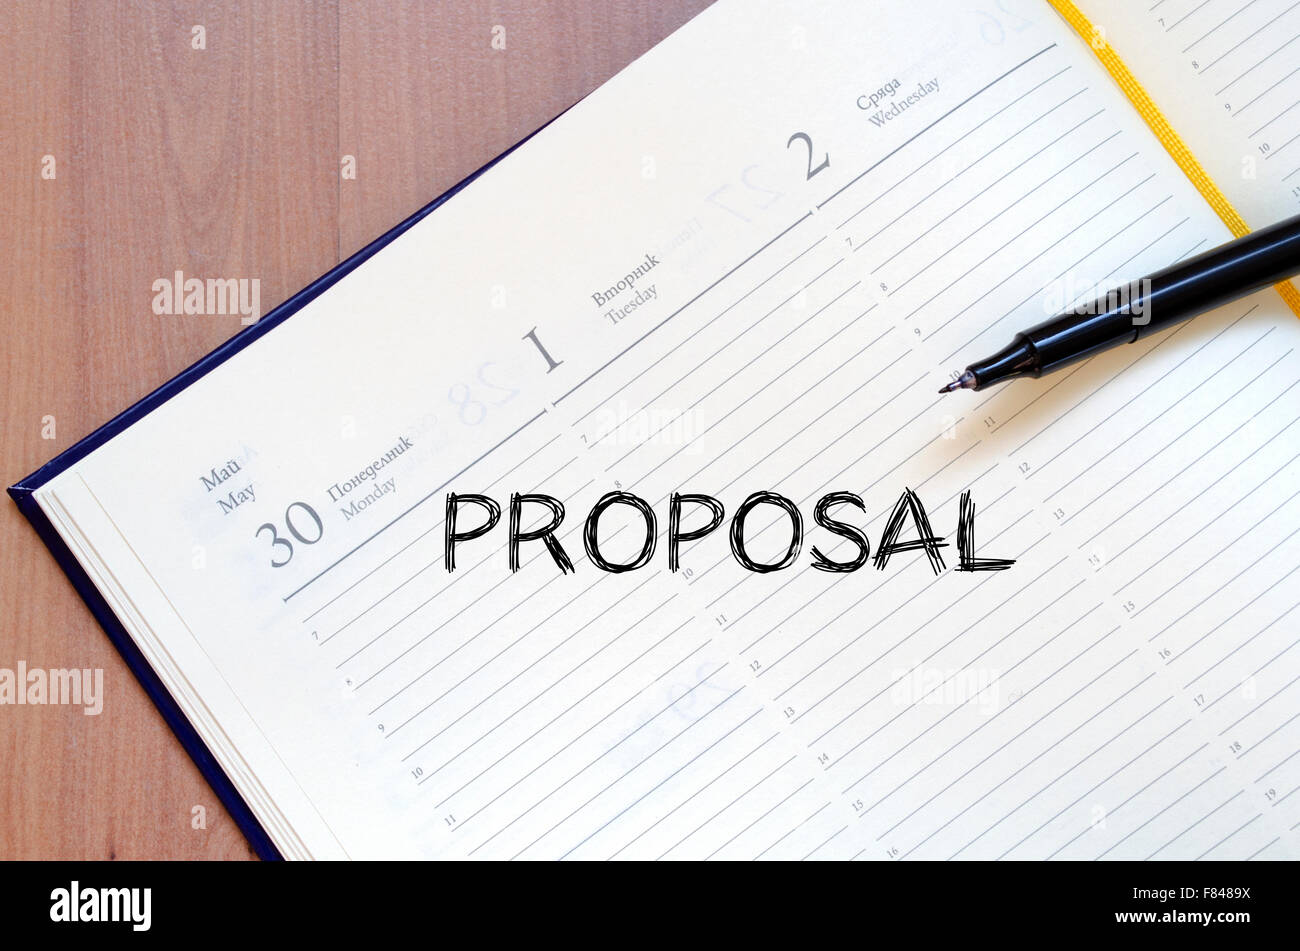 How to write a concept proposal